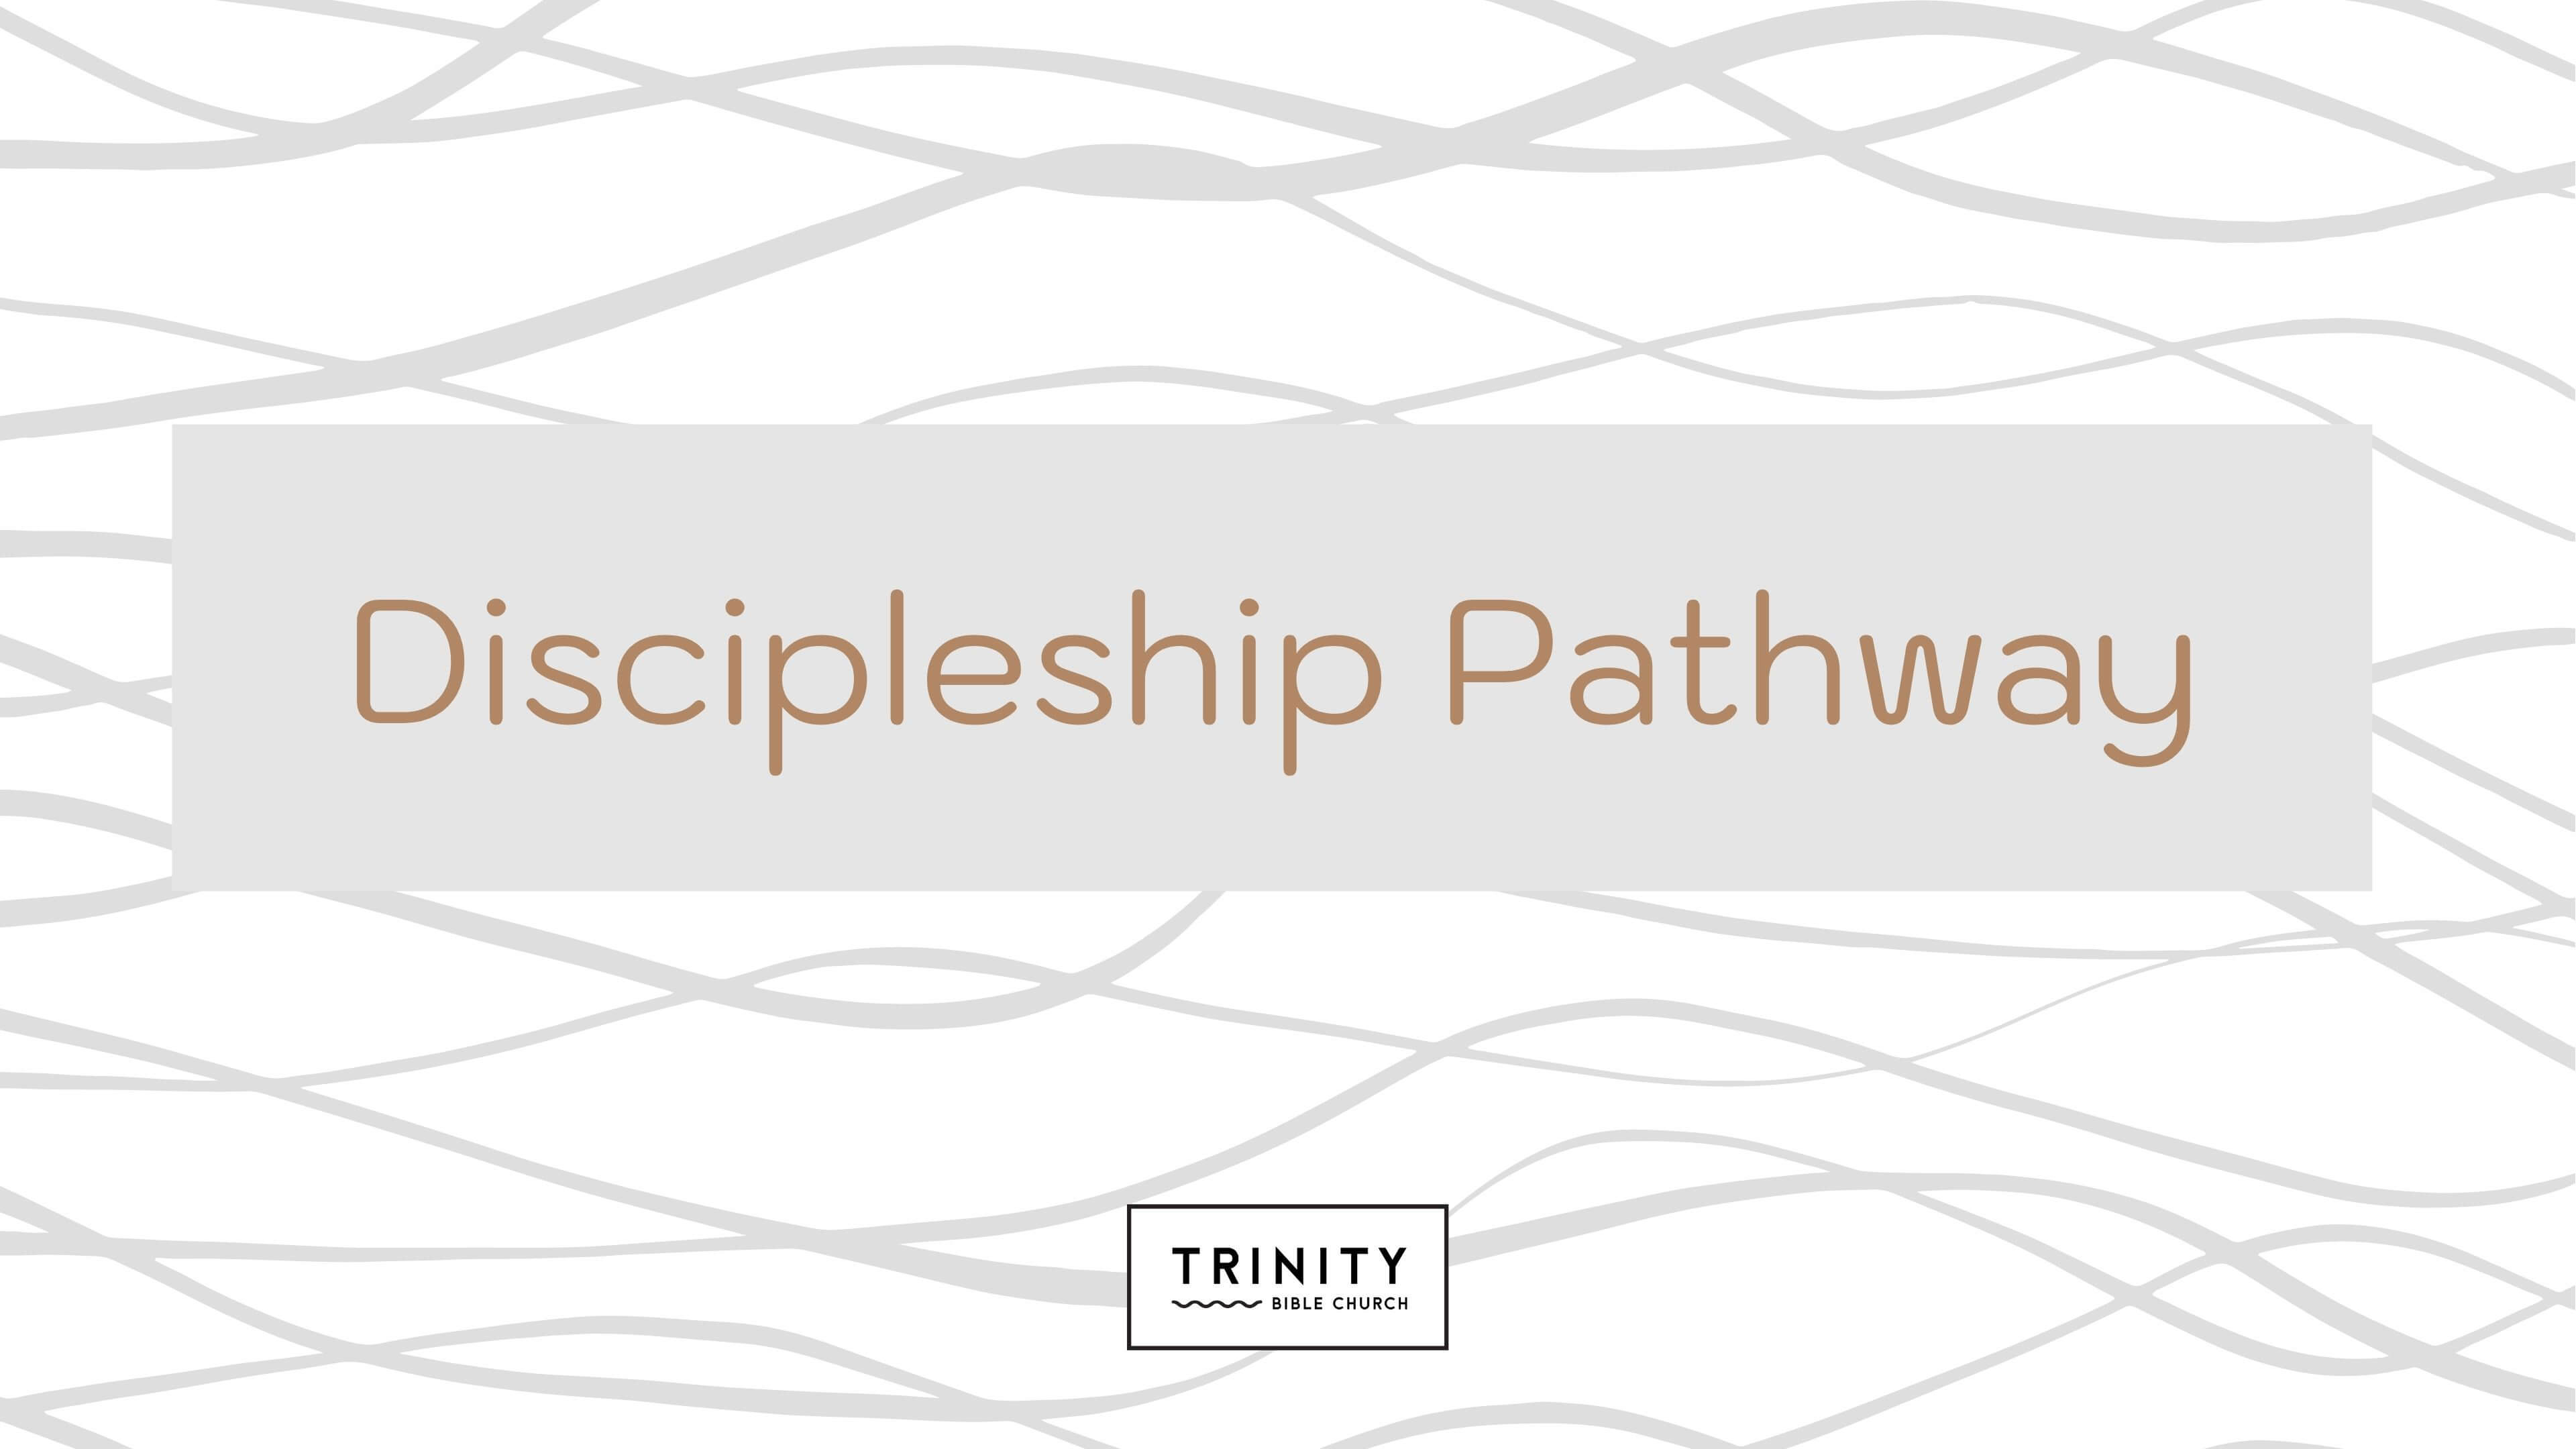 Discipleship Pathway Introduction Graphic (File Compressed)